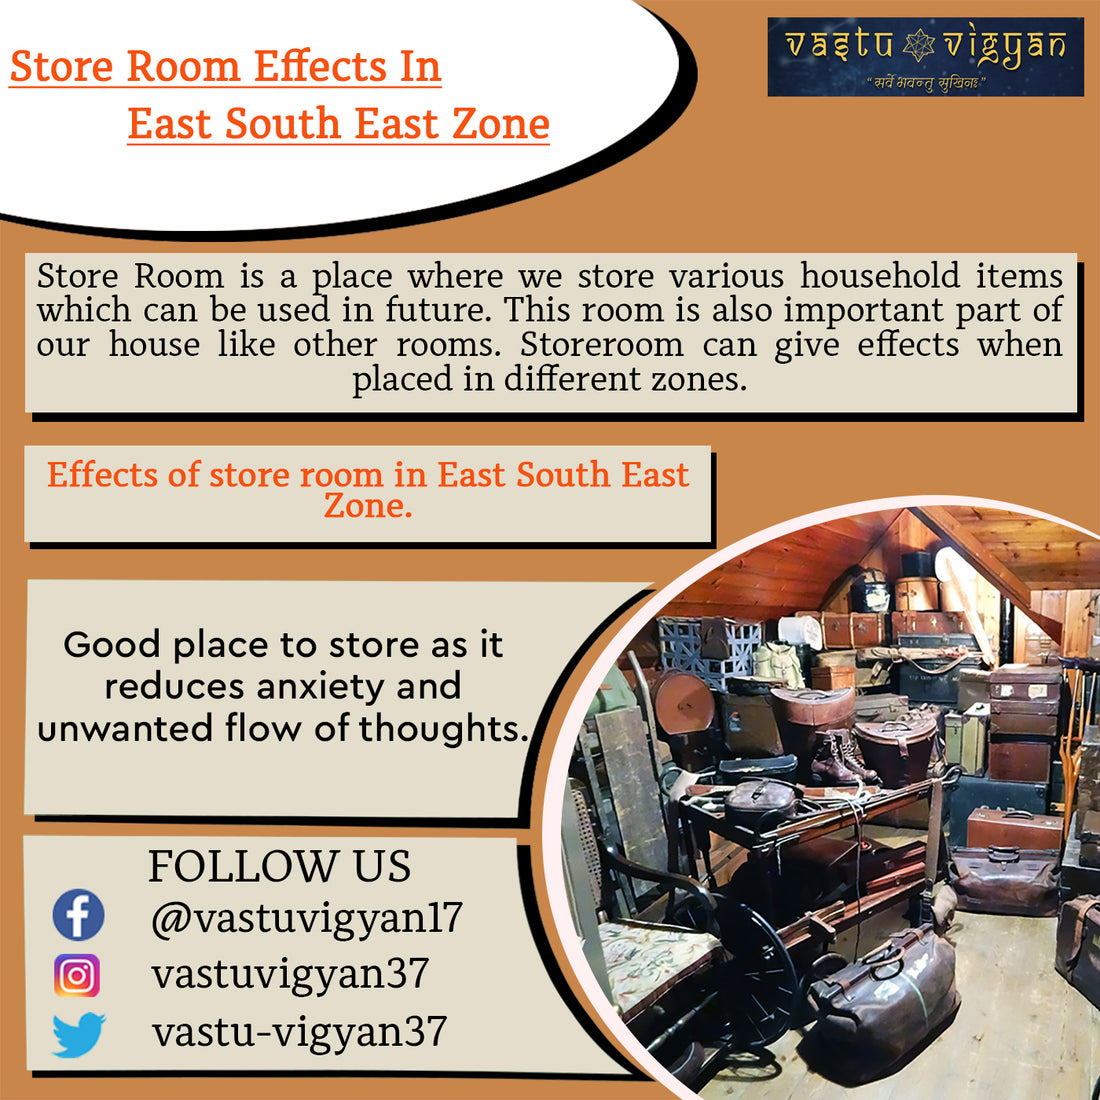 Store Room Effects in East South East Zone